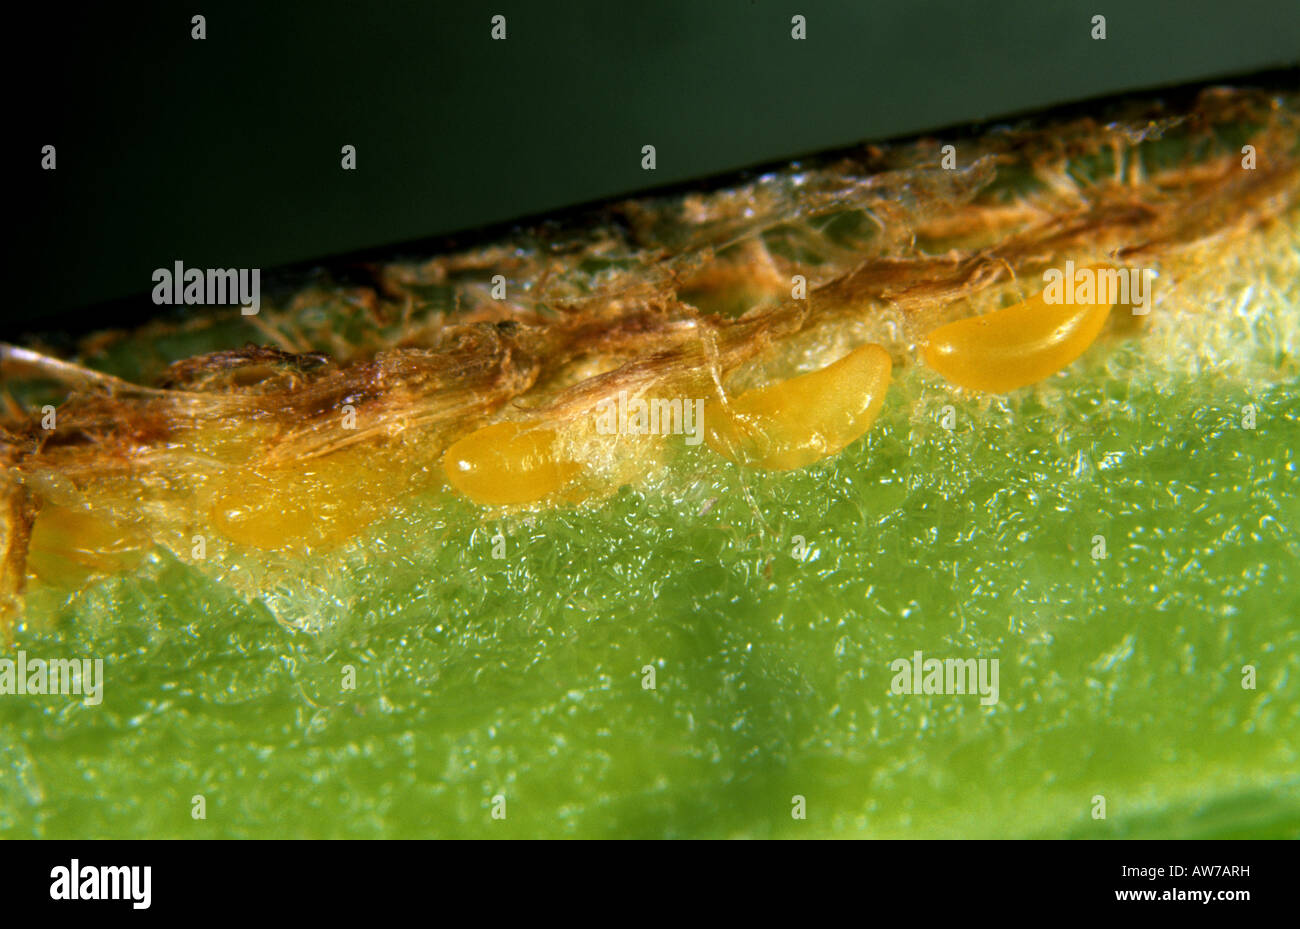 Eggs of a large or variable rose sawfly (Arge pagana) laid inside the peduncle of a rose flower Stock Photo